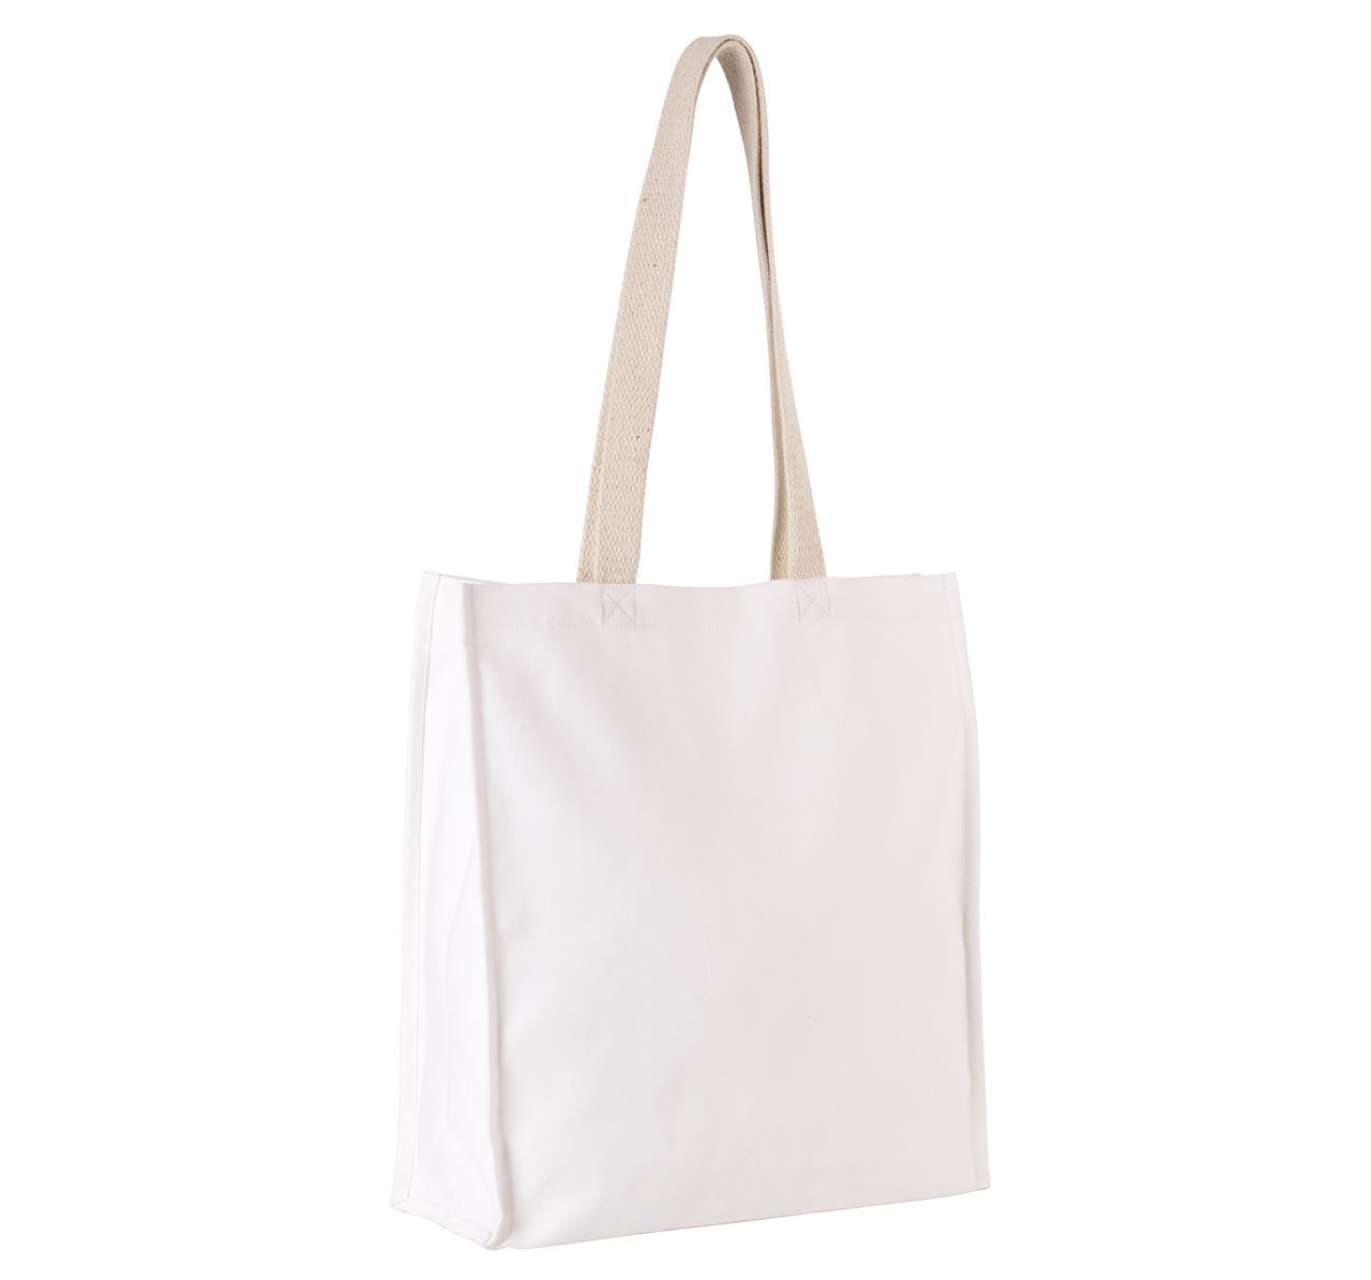 TOTE BAG WITH GUSSET